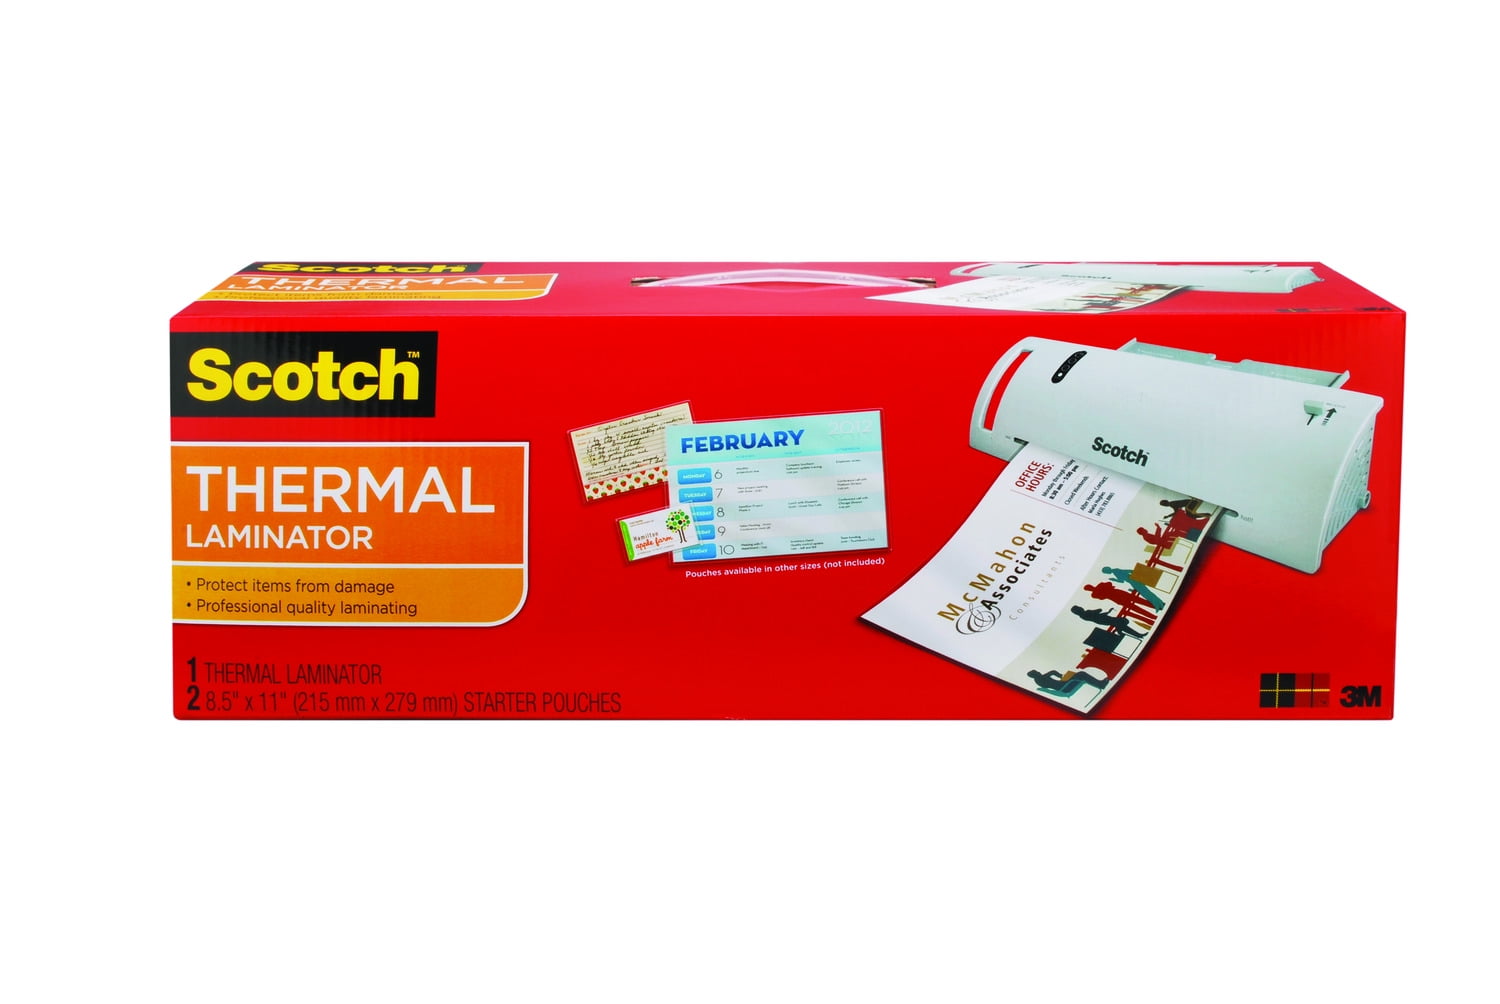 ROYAL SOVEREIGN ES-915 9 Thermal and Cold 2 Roller Pouch Laminator